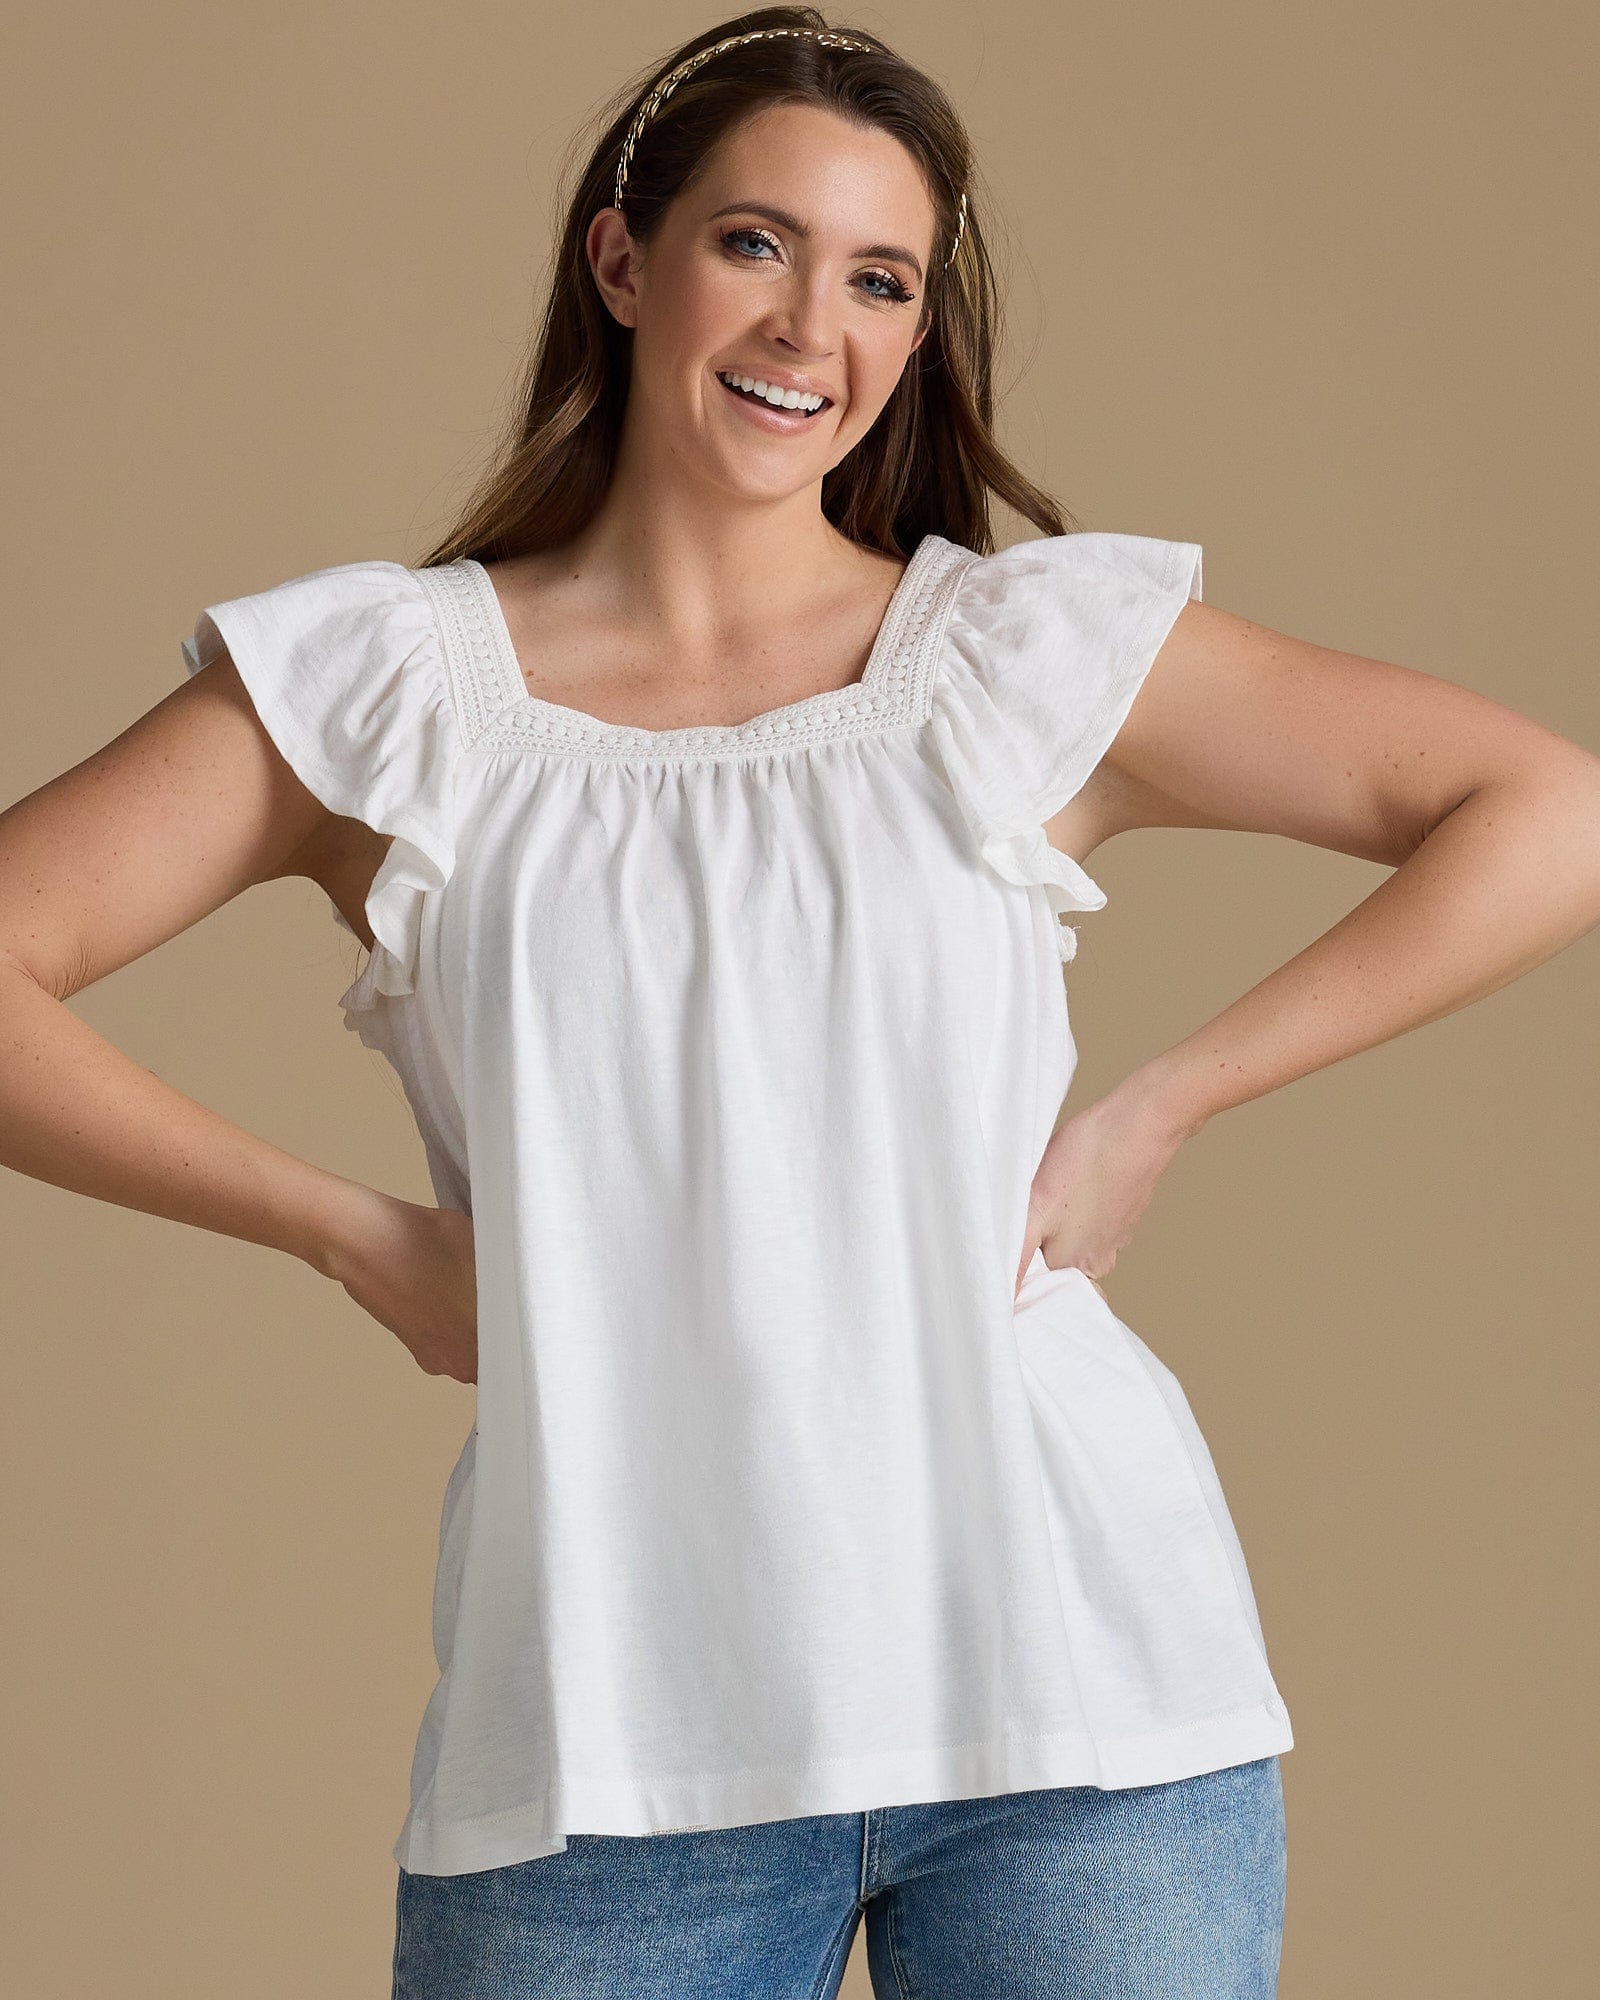 Woman in a white top with a square neckline and flutter sleeves